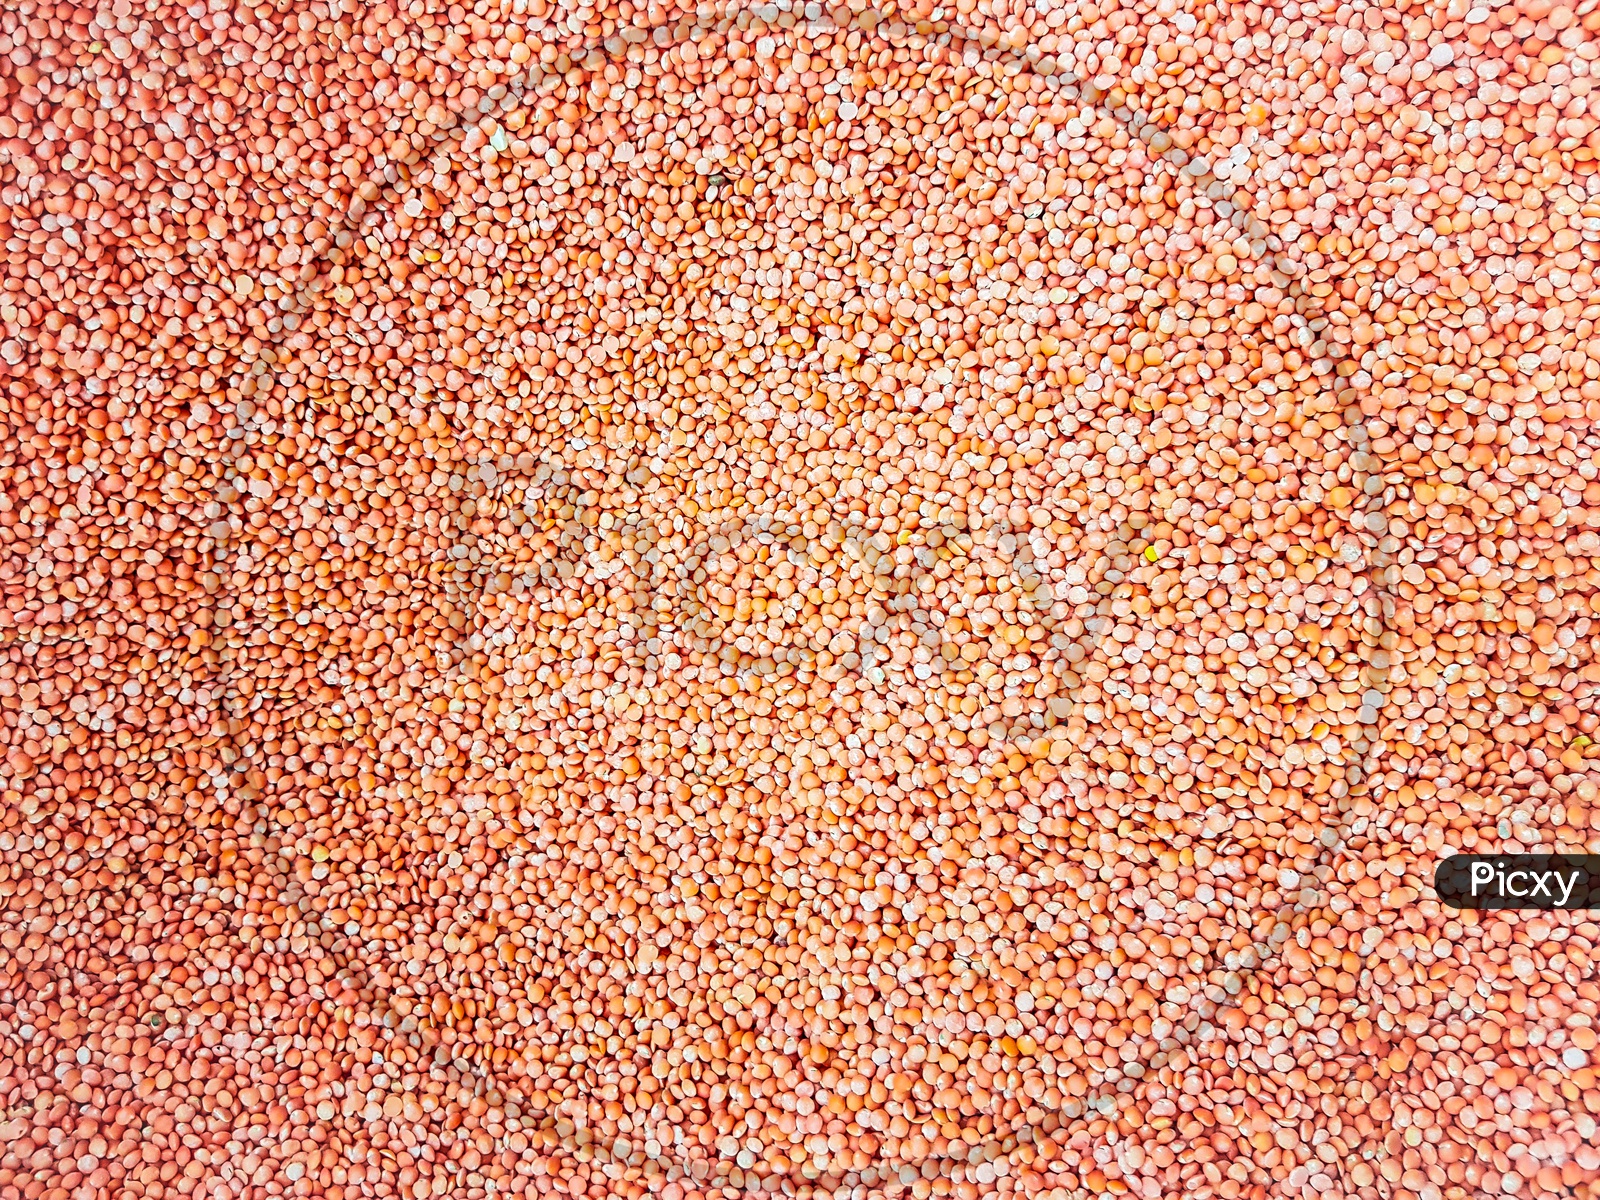 Red Lentil Raw Uncooked Beans Masoor Dal Close Up. Background Texture